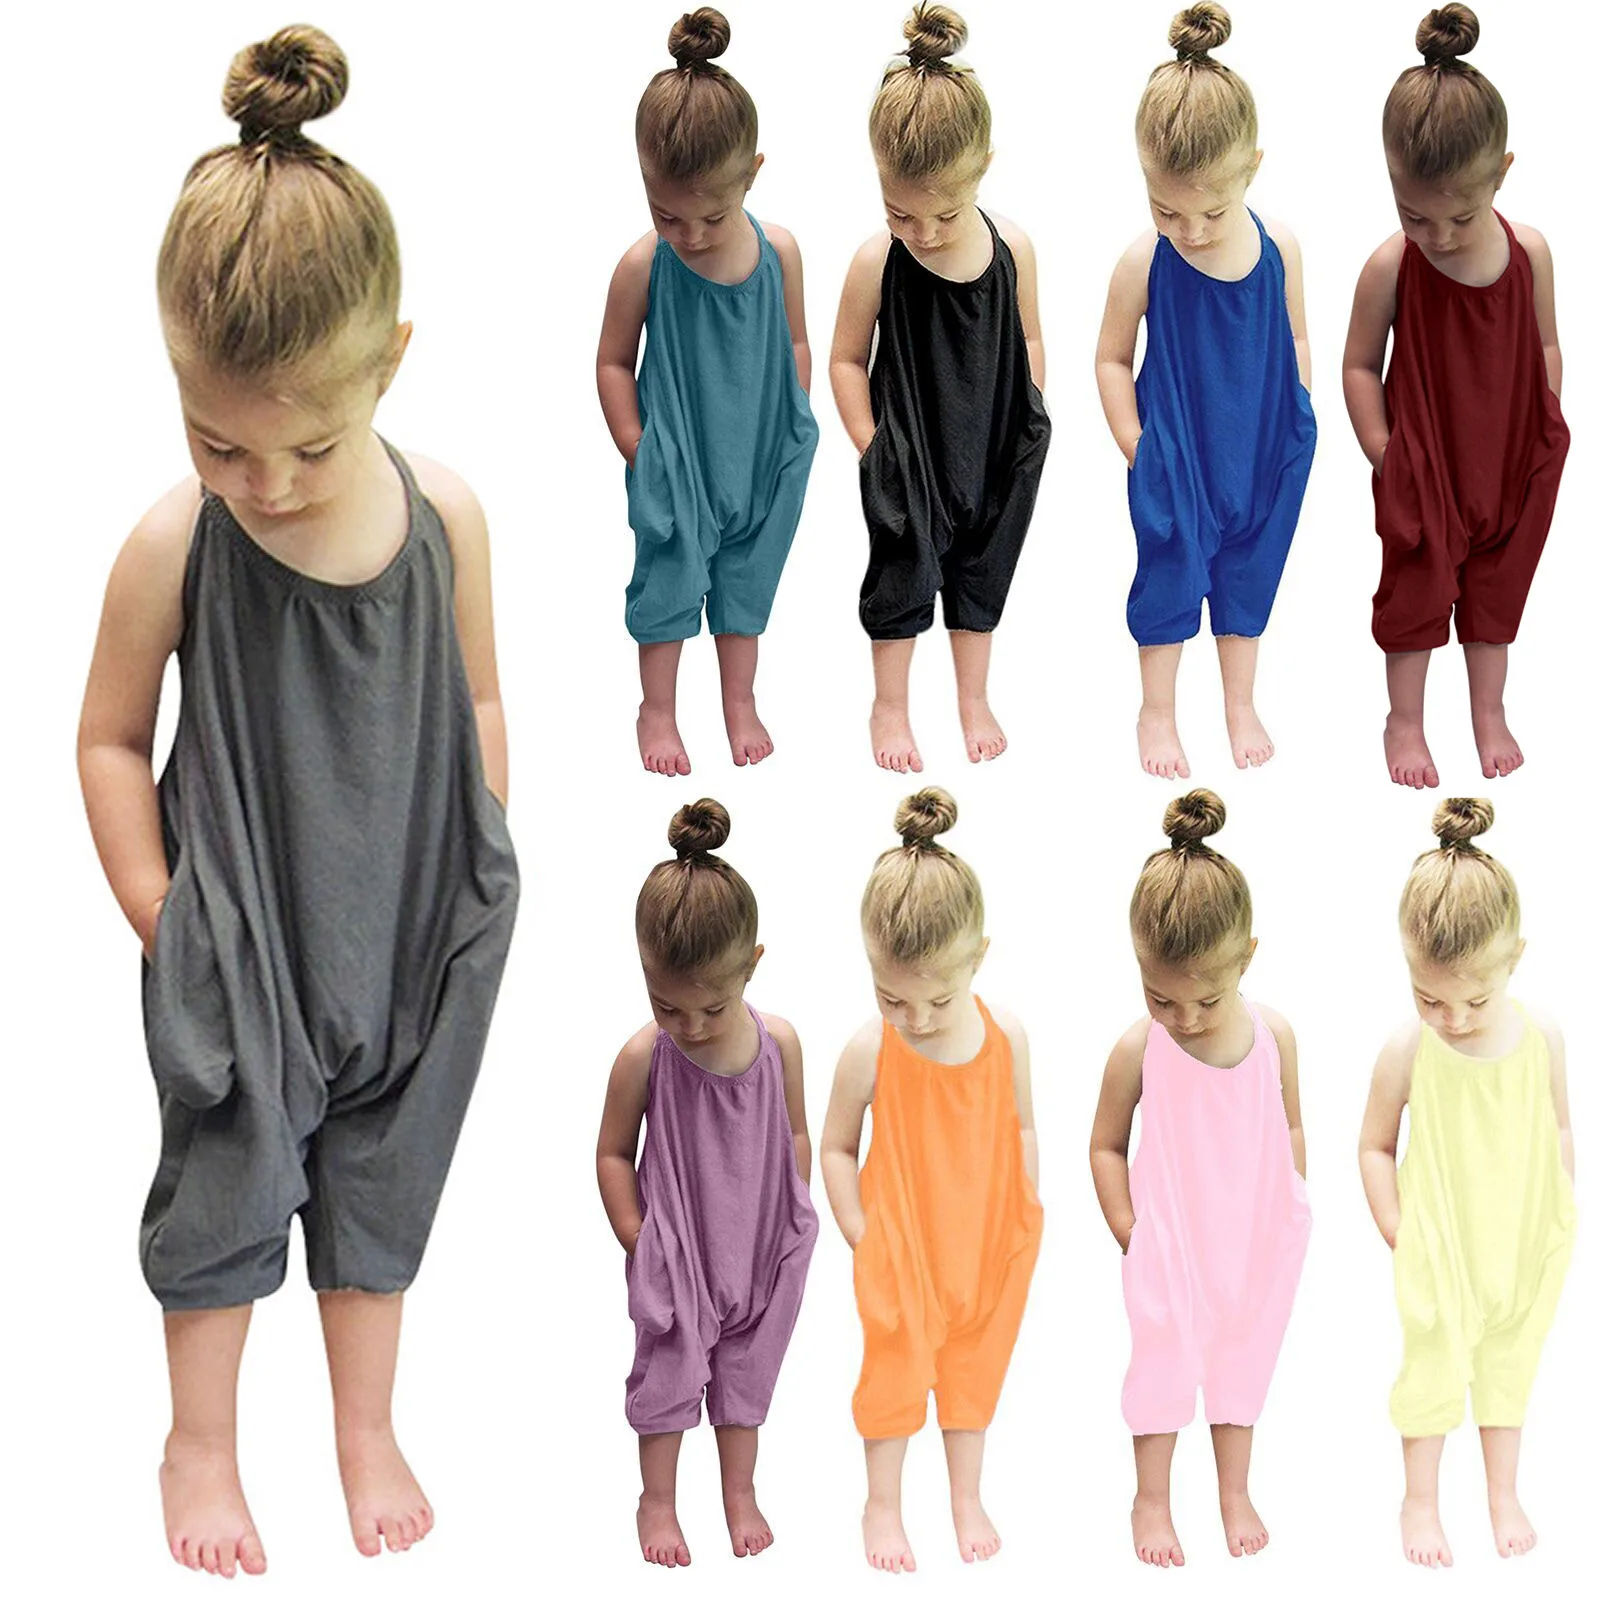 Newborn Baby Toddler Kids Girls Backless Straps Romper Jumpsuit Playsuit Clothes 